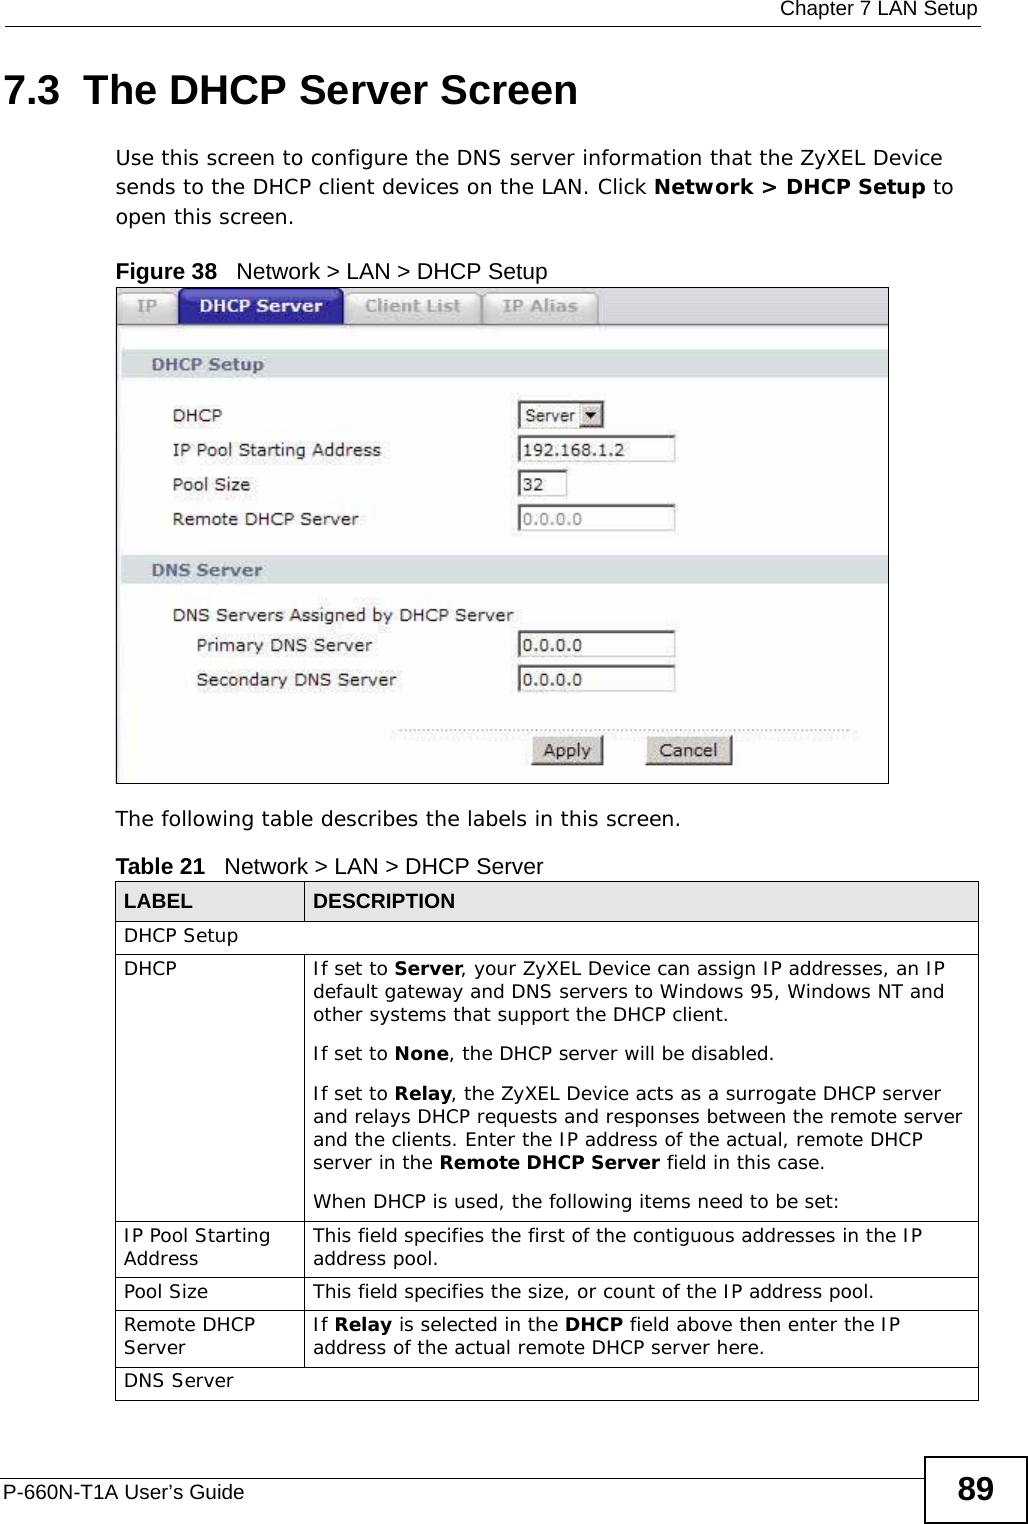  Chapter 7 LAN SetupP-660N-T1A User’s Guide 897.3  The DHCP Server ScreenUse this screen to configure the DNS server information that the ZyXEL Device sends to the DHCP client devices on the LAN. Click Network &gt; DHCP Setup to open this screen.Figure 38   Network &gt; LAN &gt; DHCP SetupThe following table describes the labels in this screen.Table 21   Network &gt; LAN &gt; DHCP ServerLABEL DESCRIPTIONDHCP SetupDHCP If set to Server, your ZyXEL Device can assign IP addresses, an IP default gateway and DNS servers to Windows 95, Windows NT and other systems that support the DHCP client.If set to None, the DHCP server will be disabled. If set to Relay, the ZyXEL Device acts as a surrogate DHCP server and relays DHCP requests and responses between the remote server and the clients. Enter the IP address of the actual, remote DHCP server in the Remote DHCP Server field in this case. When DHCP is used, the following items need to be set: IP Pool Starting Address This field specifies the first of the contiguous addresses in the IP address pool.Pool Size This field specifies the size, or count of the IP address pool.Remote DHCP Server If Relay is selected in the DHCP field above then enter the IP address of the actual remote DHCP server here.DNS Server